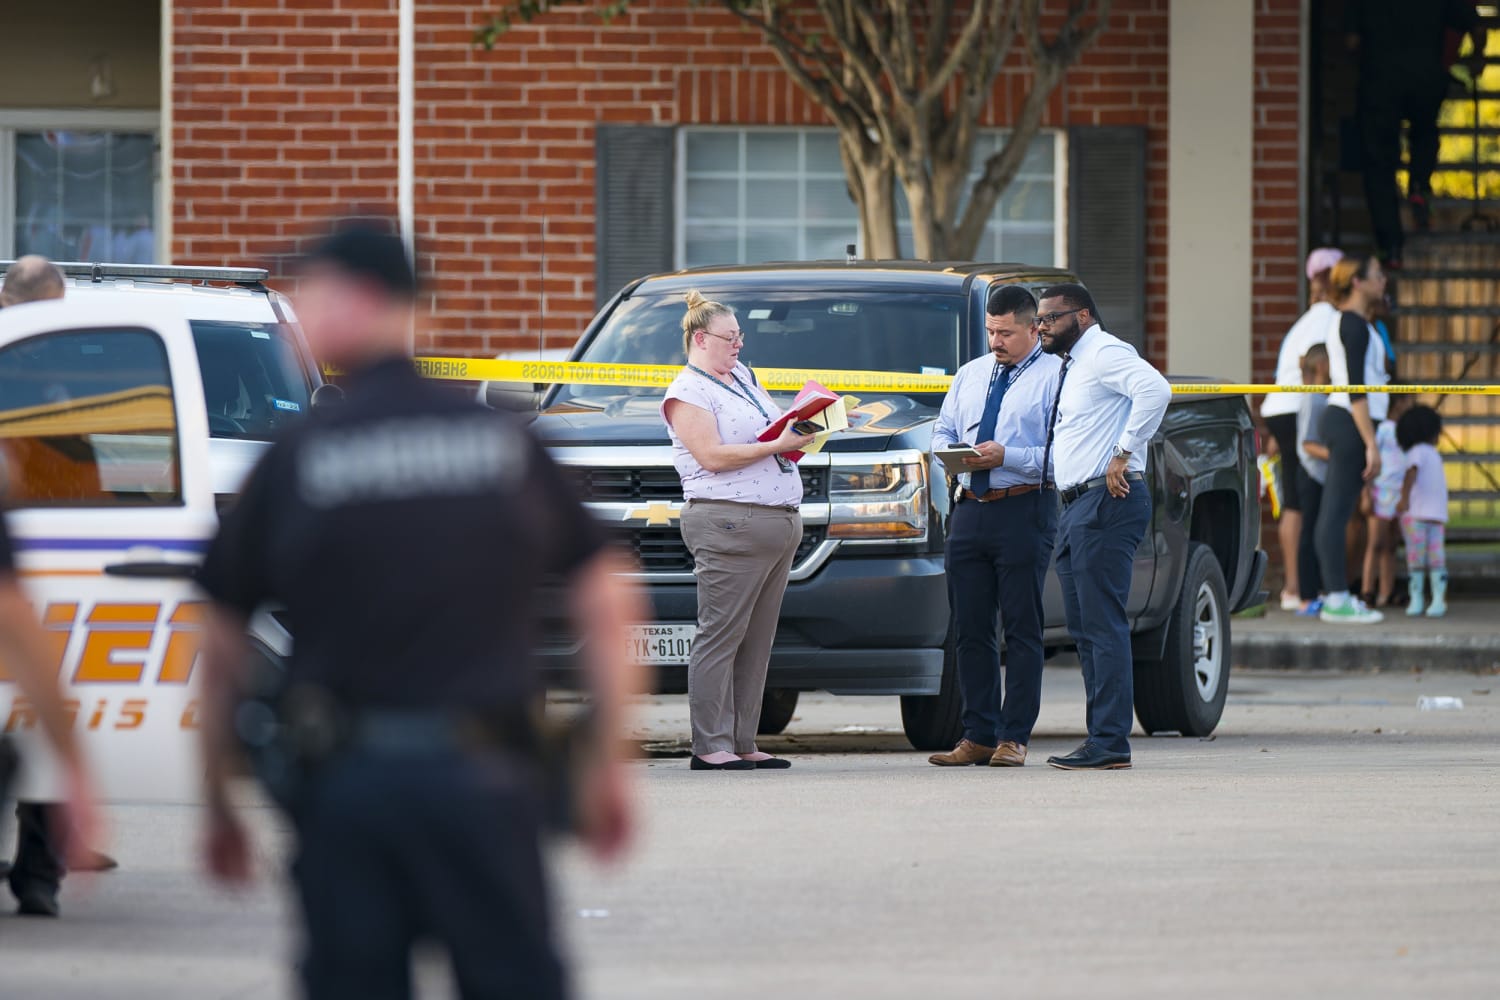 Mom of 3 children found in Texas apartment with skeletal remains released